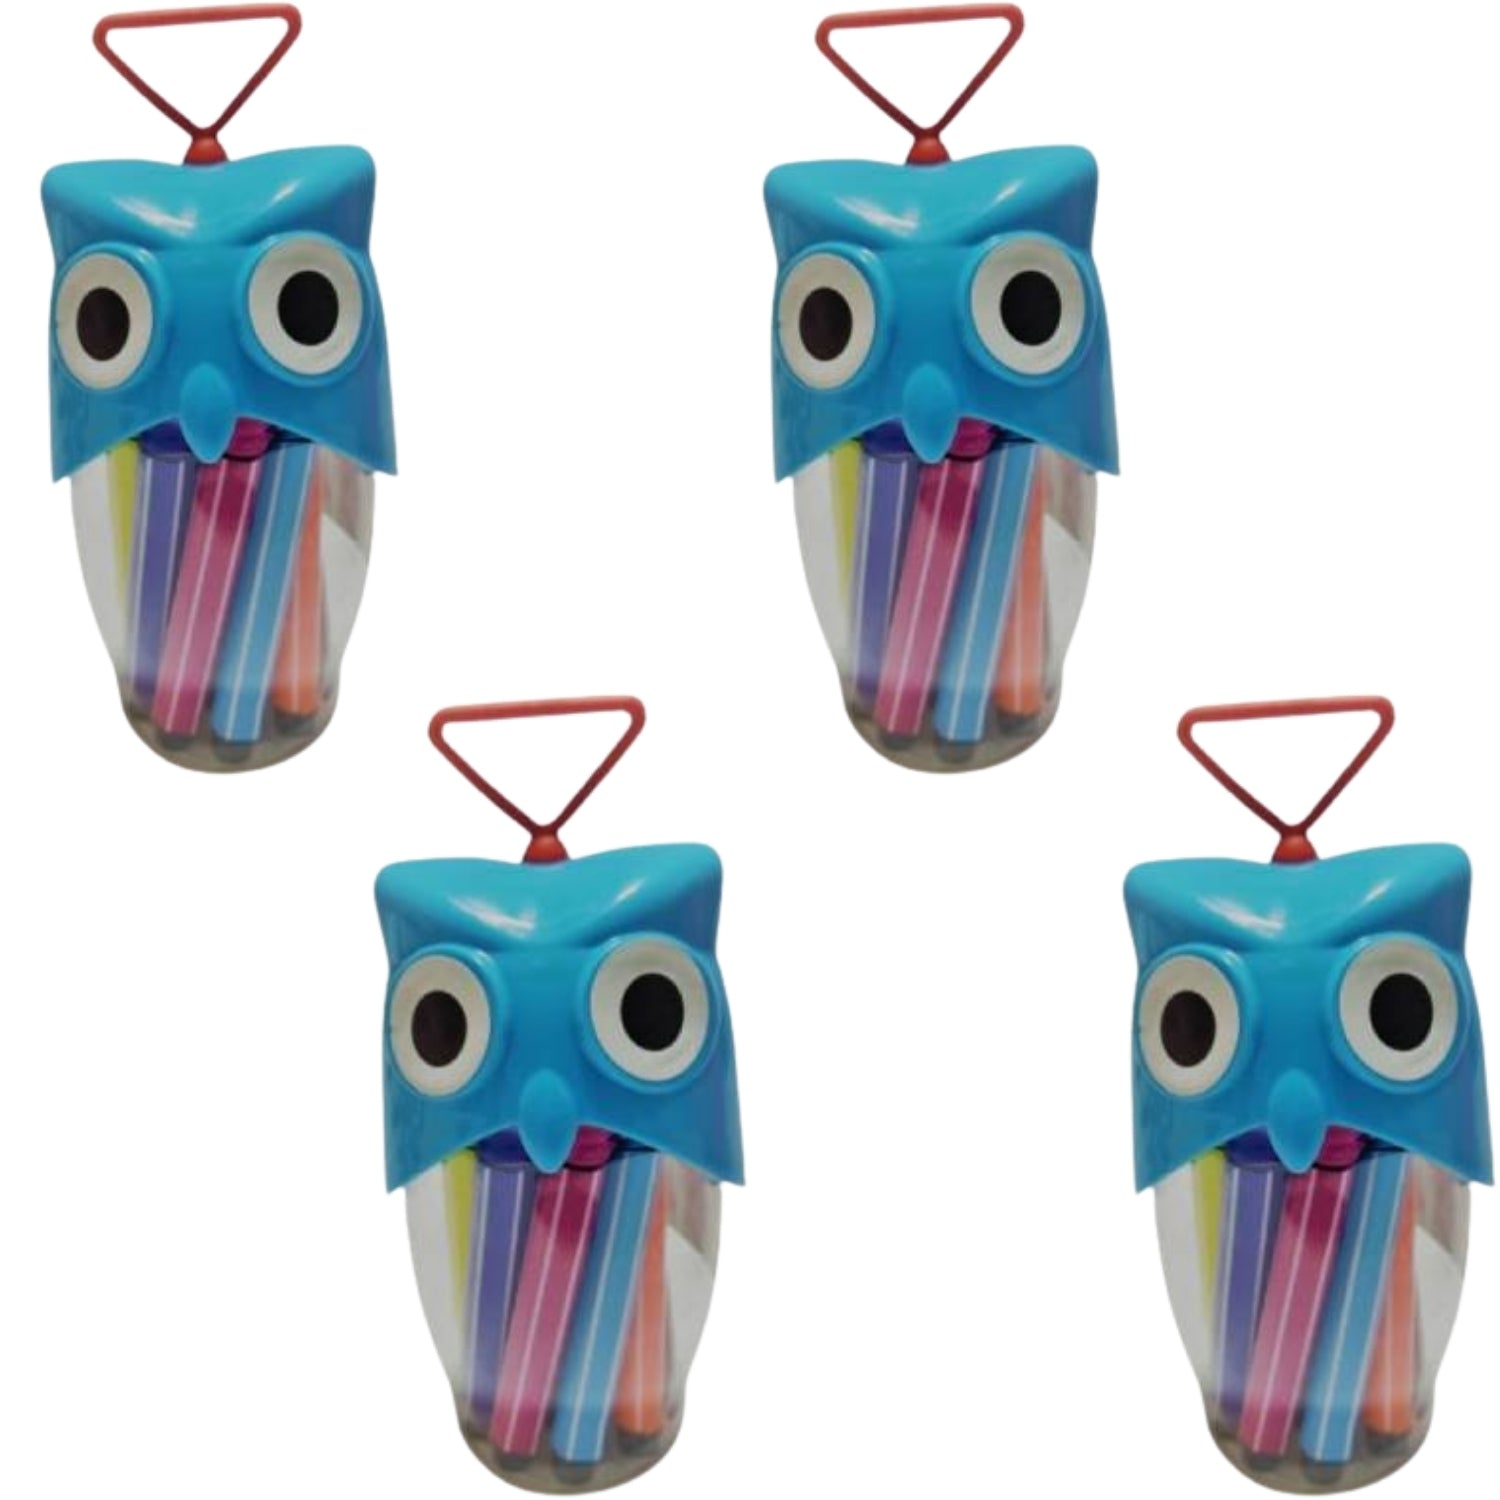 Sketch Pen with Owl Design | Sketch Pen Stationary Kit -For Birthday Party Return Gift - apkamart #Style_Pack of 4